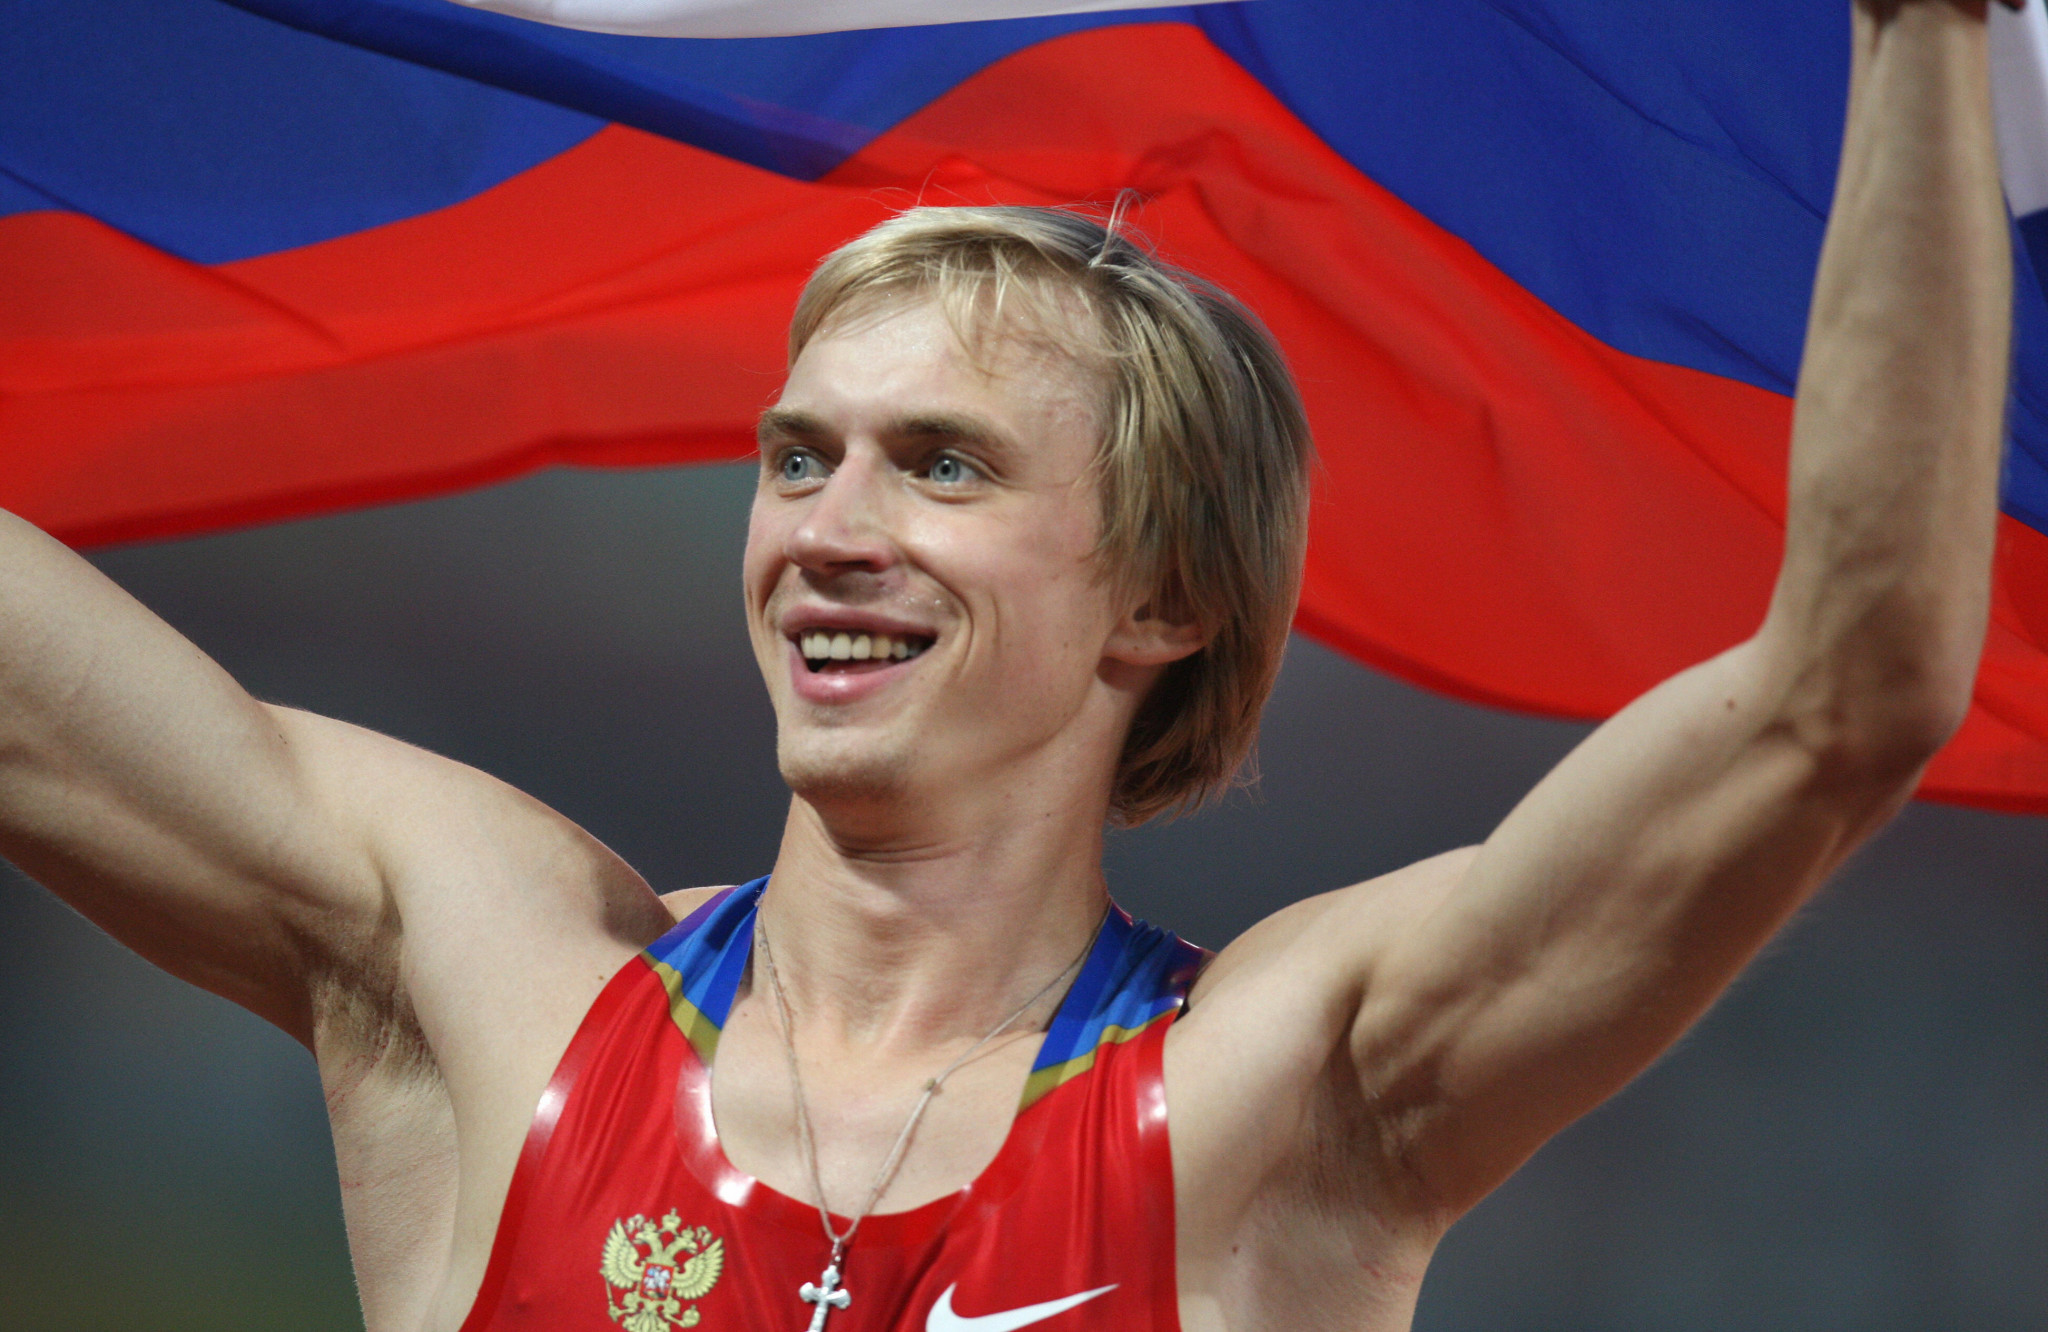 Andrei Silnov won Olympic high jump gold medal at Beijing 2008 ©Getty Images